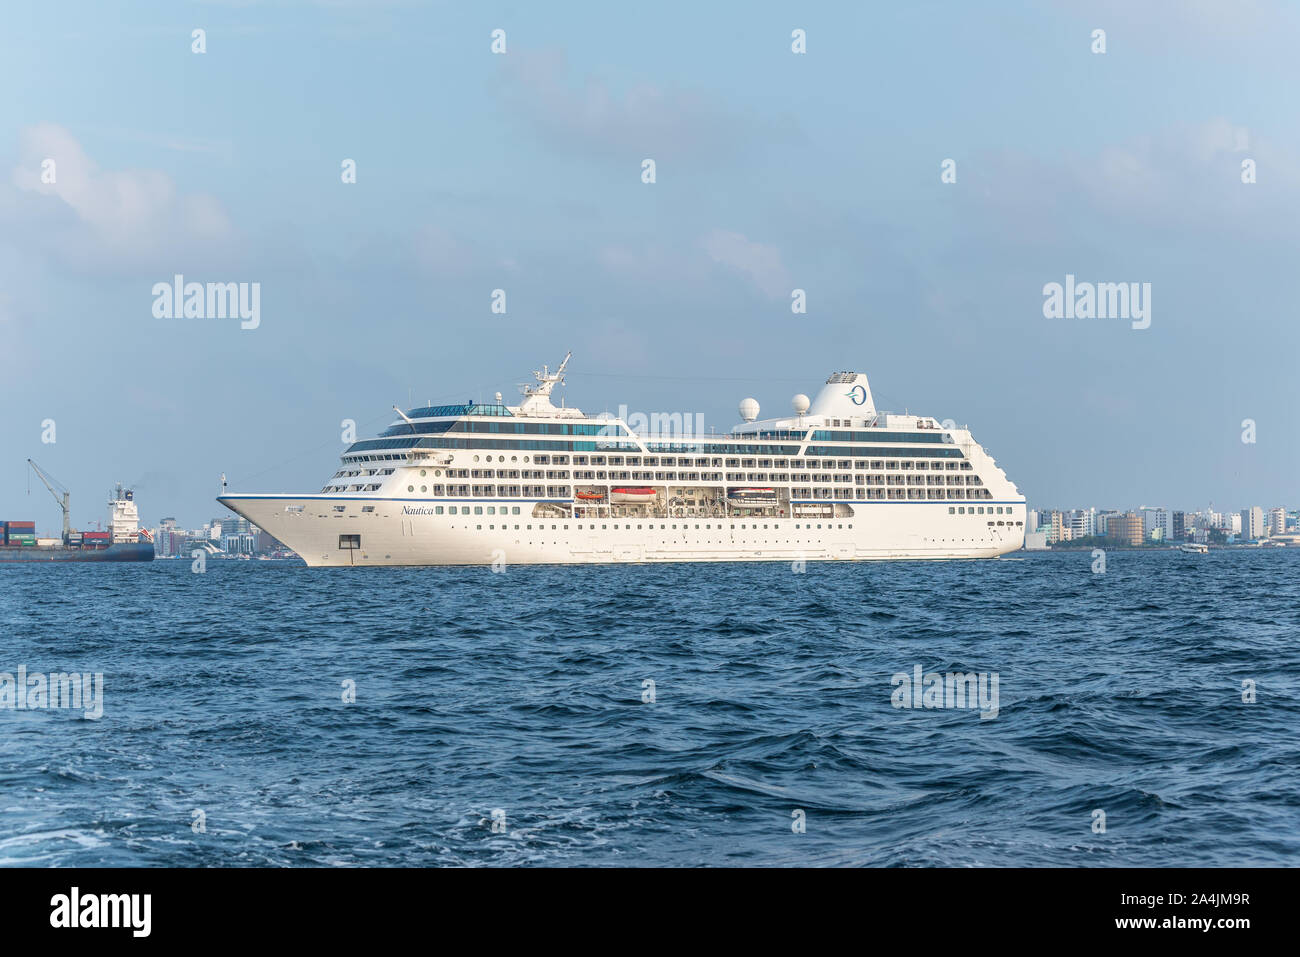 Male, Maldives - November 17, 2017: Oceania Cruises Nautica Cruise Ship in the outer harbor of Male island as seen from the boat in Maldives, Indian O Stock Photo